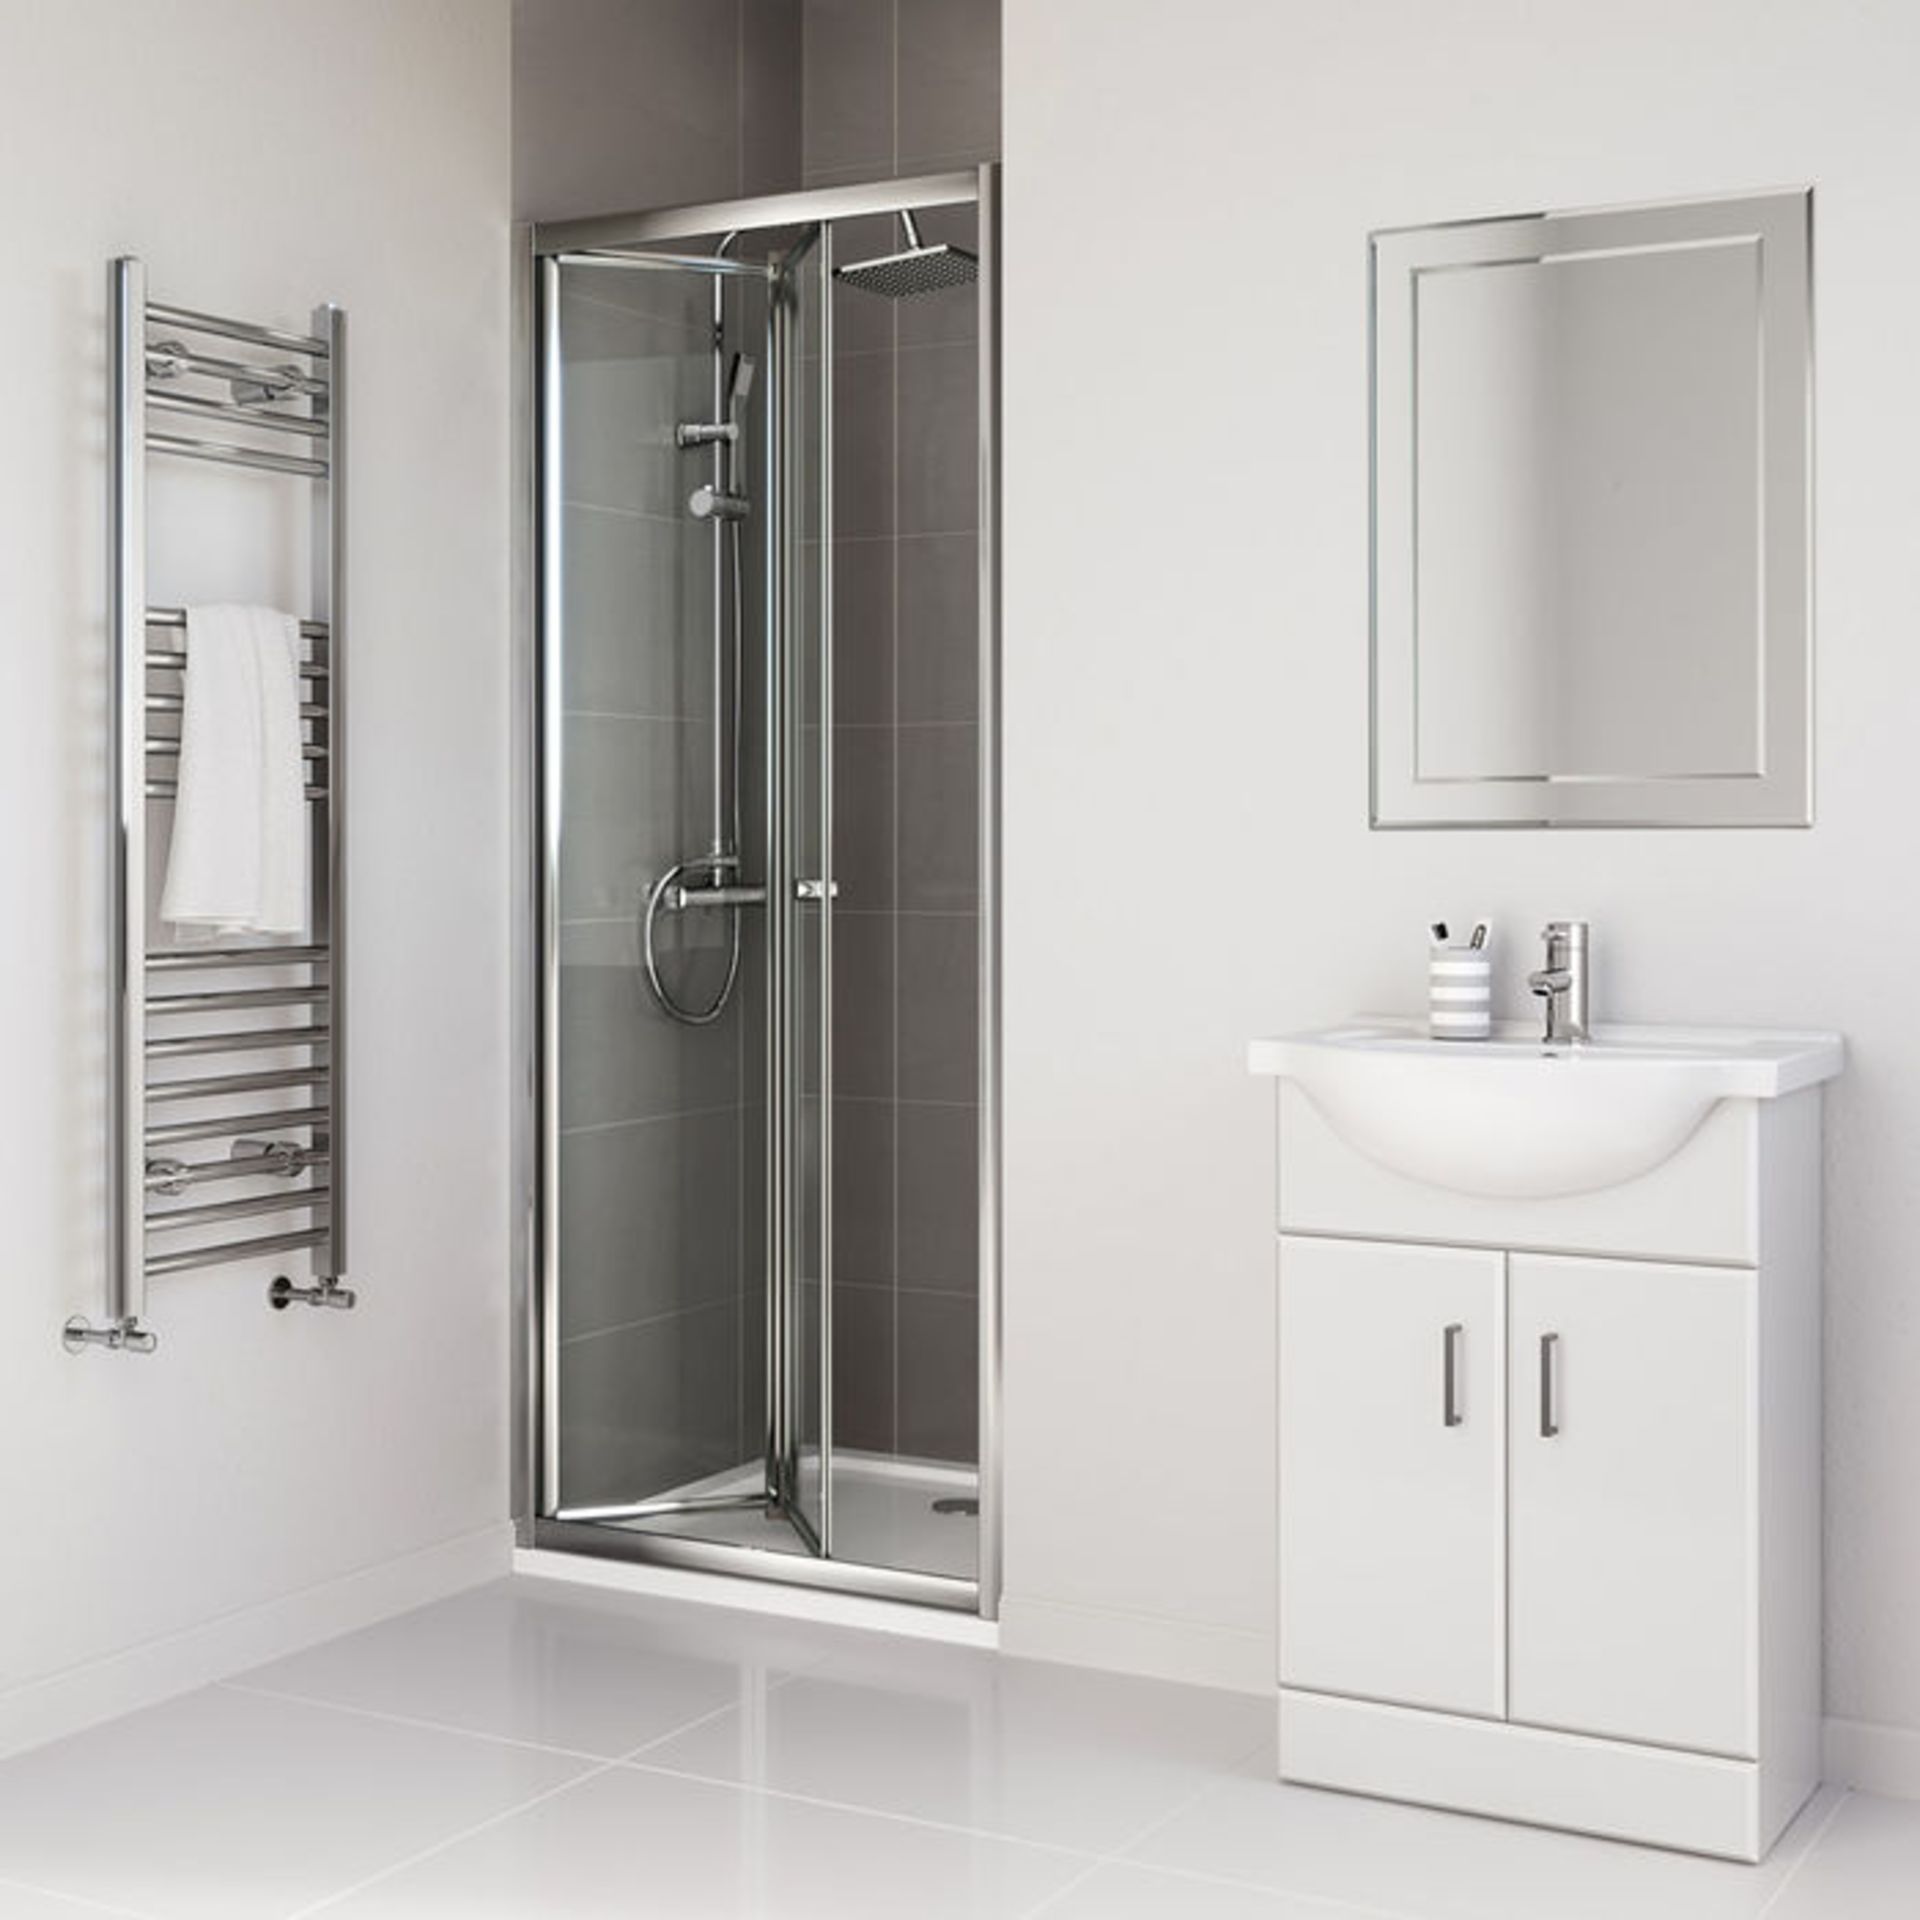 (PA151) 800mm - Elements Bi Fold Shower Door. RRP £299.99. 4mm Safety Glass Fully waterproof - Image 3 of 3